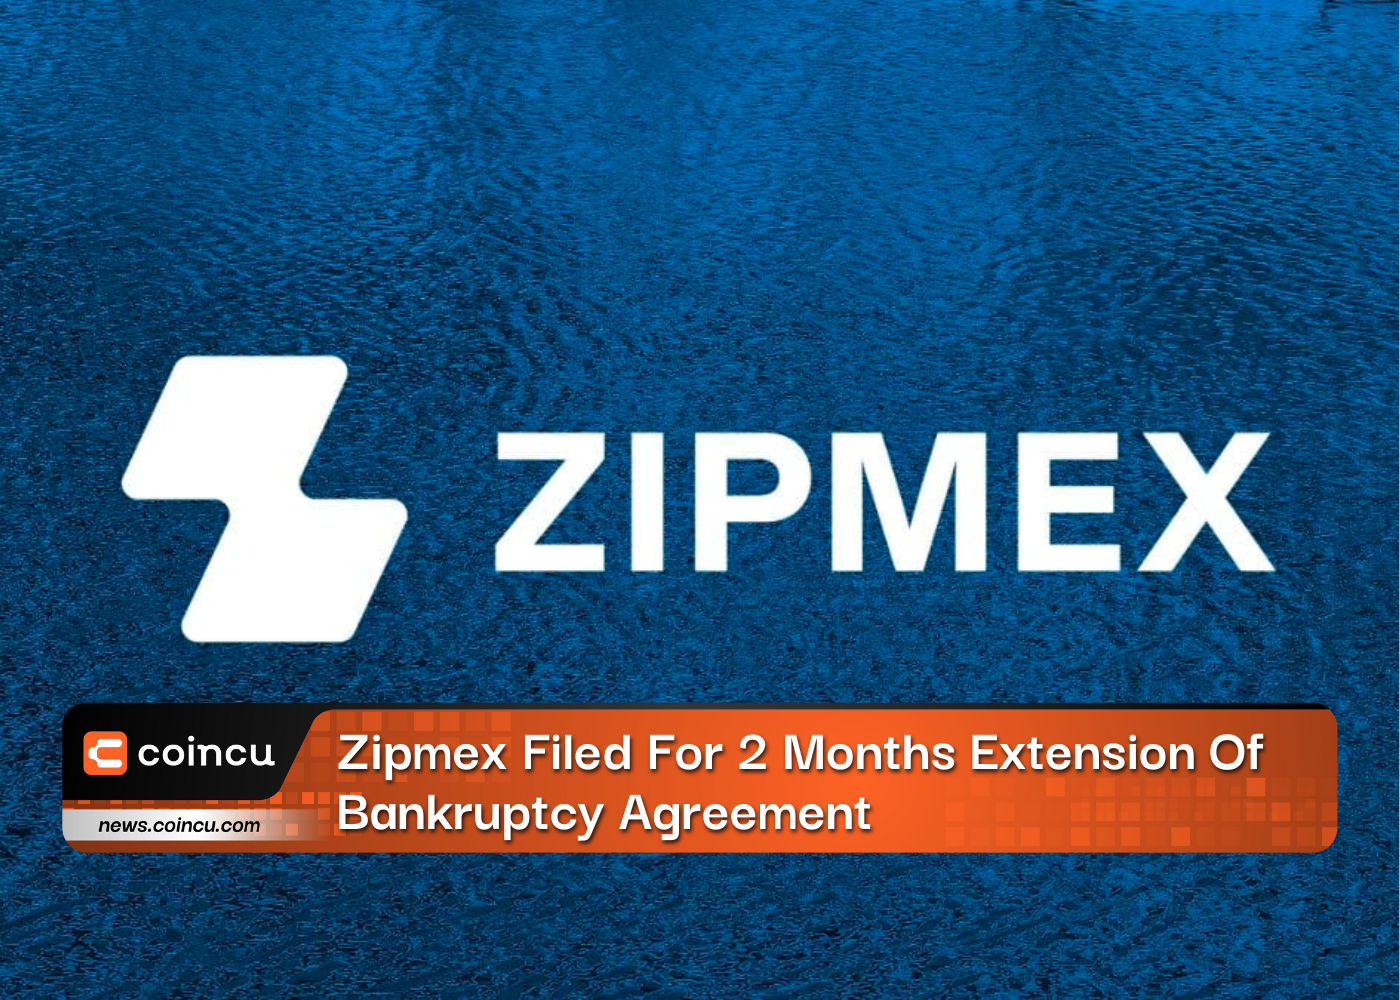 Zipmex Filed For 2 Months Extension Of Bankruptcy Agreement